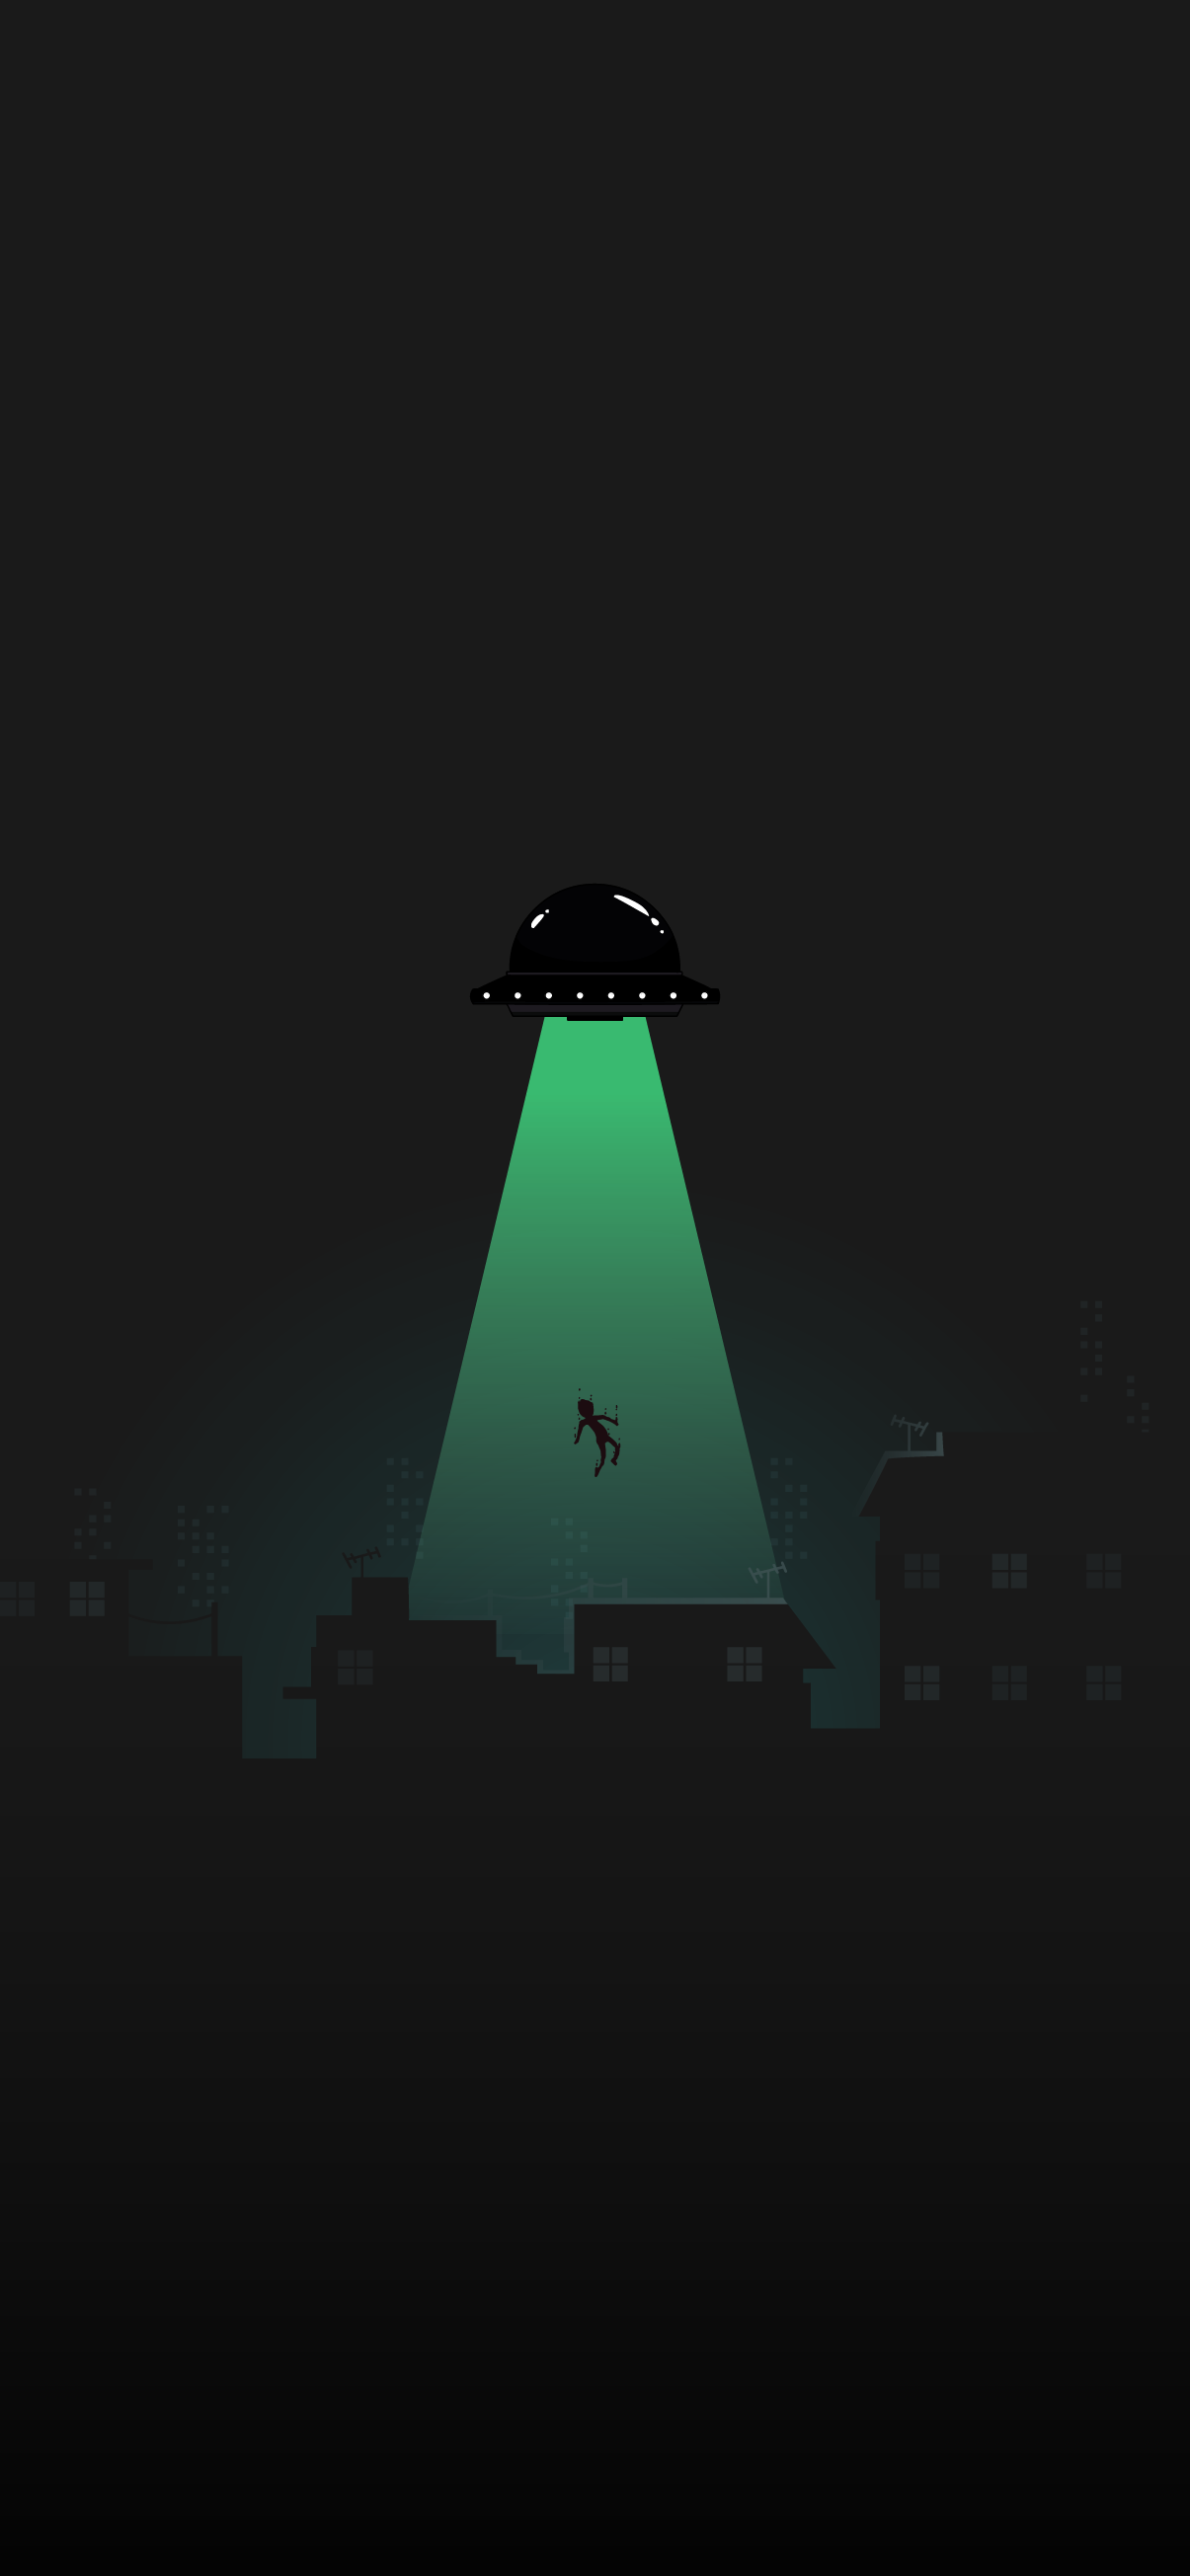 ufo abduction background wallpaper iphone 4k